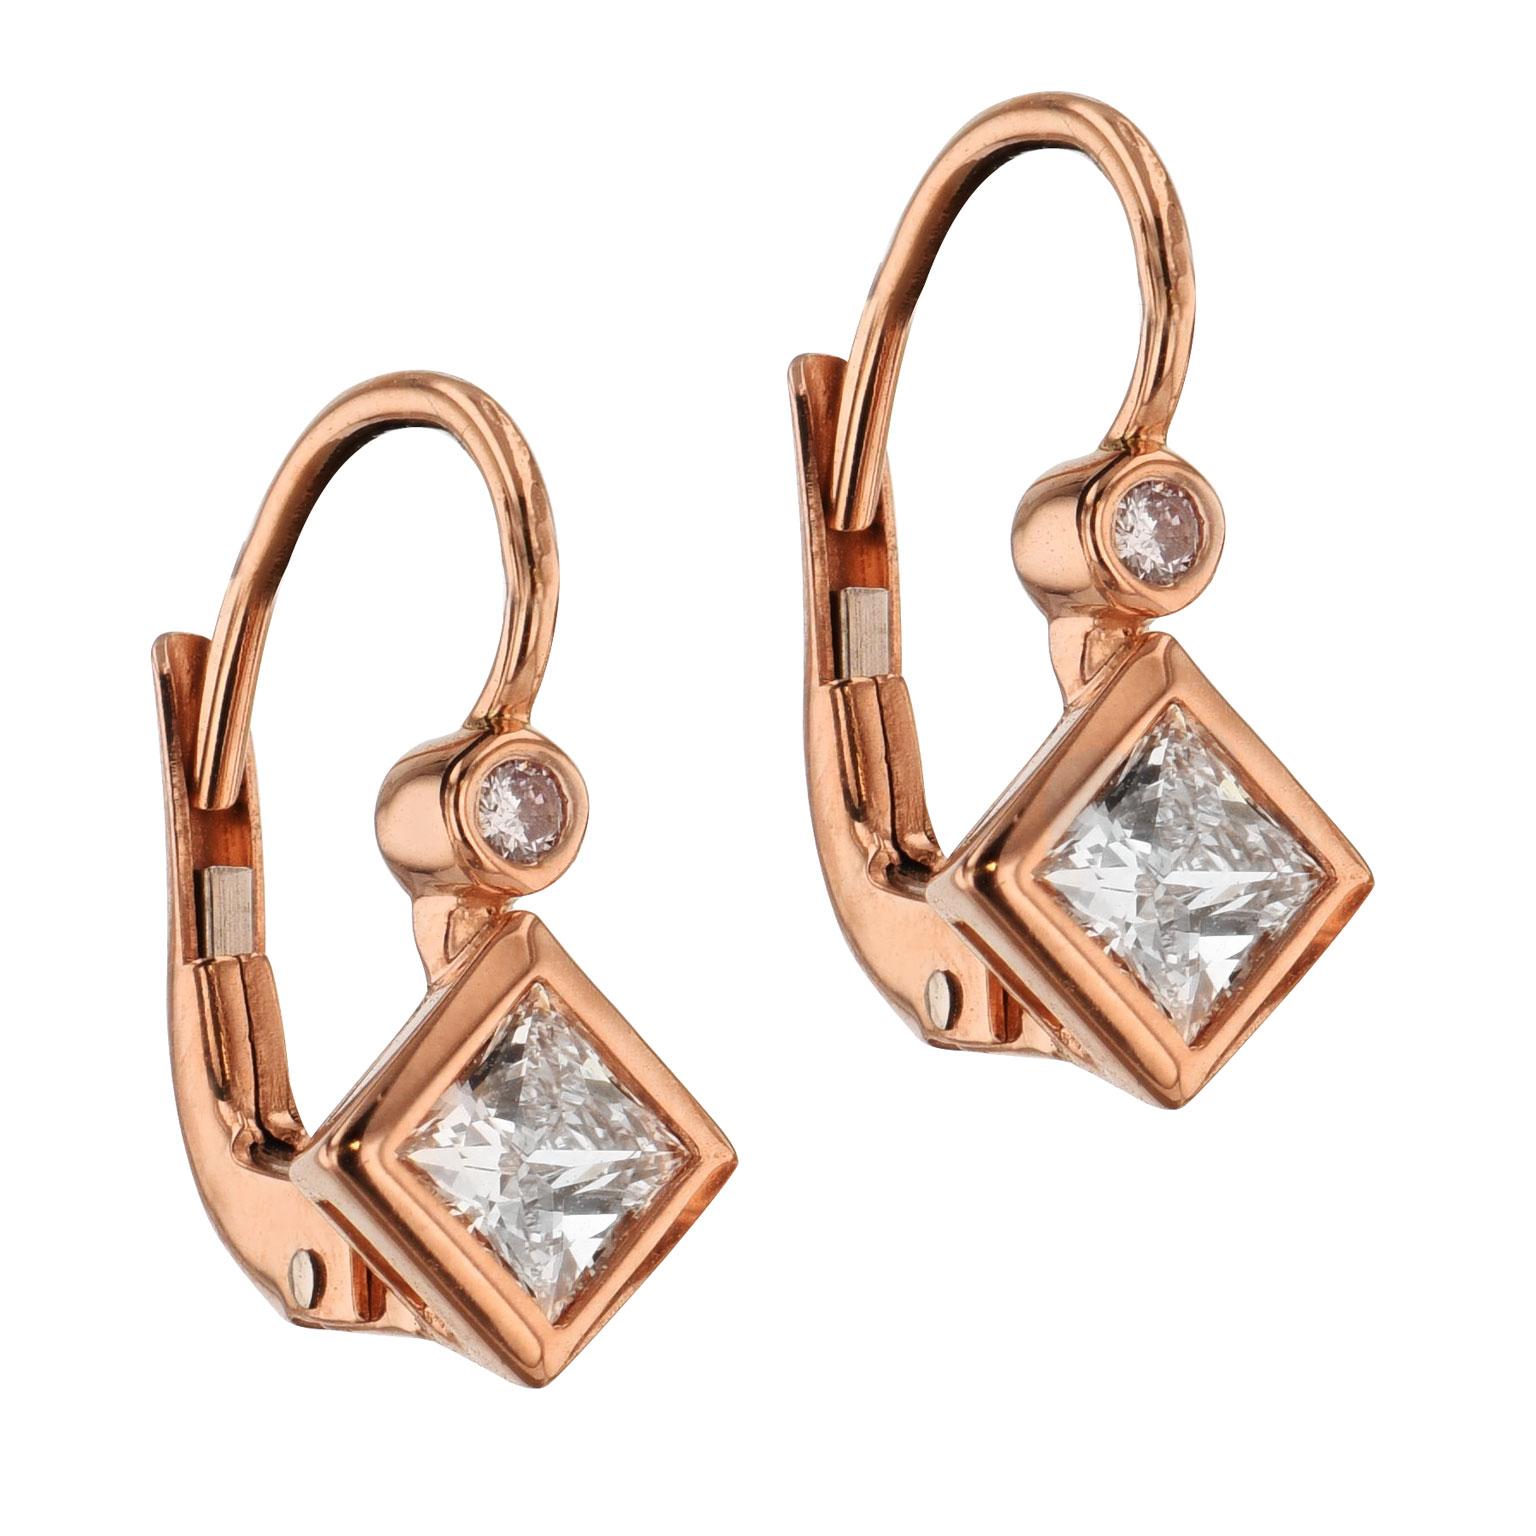 0.51 Carat Bezel Set Square Diamonds Set in 18 karat Gold Lever-Back Earrings

18 karat rose gold shimmers with warmth and romance in these one of a kind, handmade earrings, by H&H Jewels. 
They feature bezel set 0.51 carat total weight